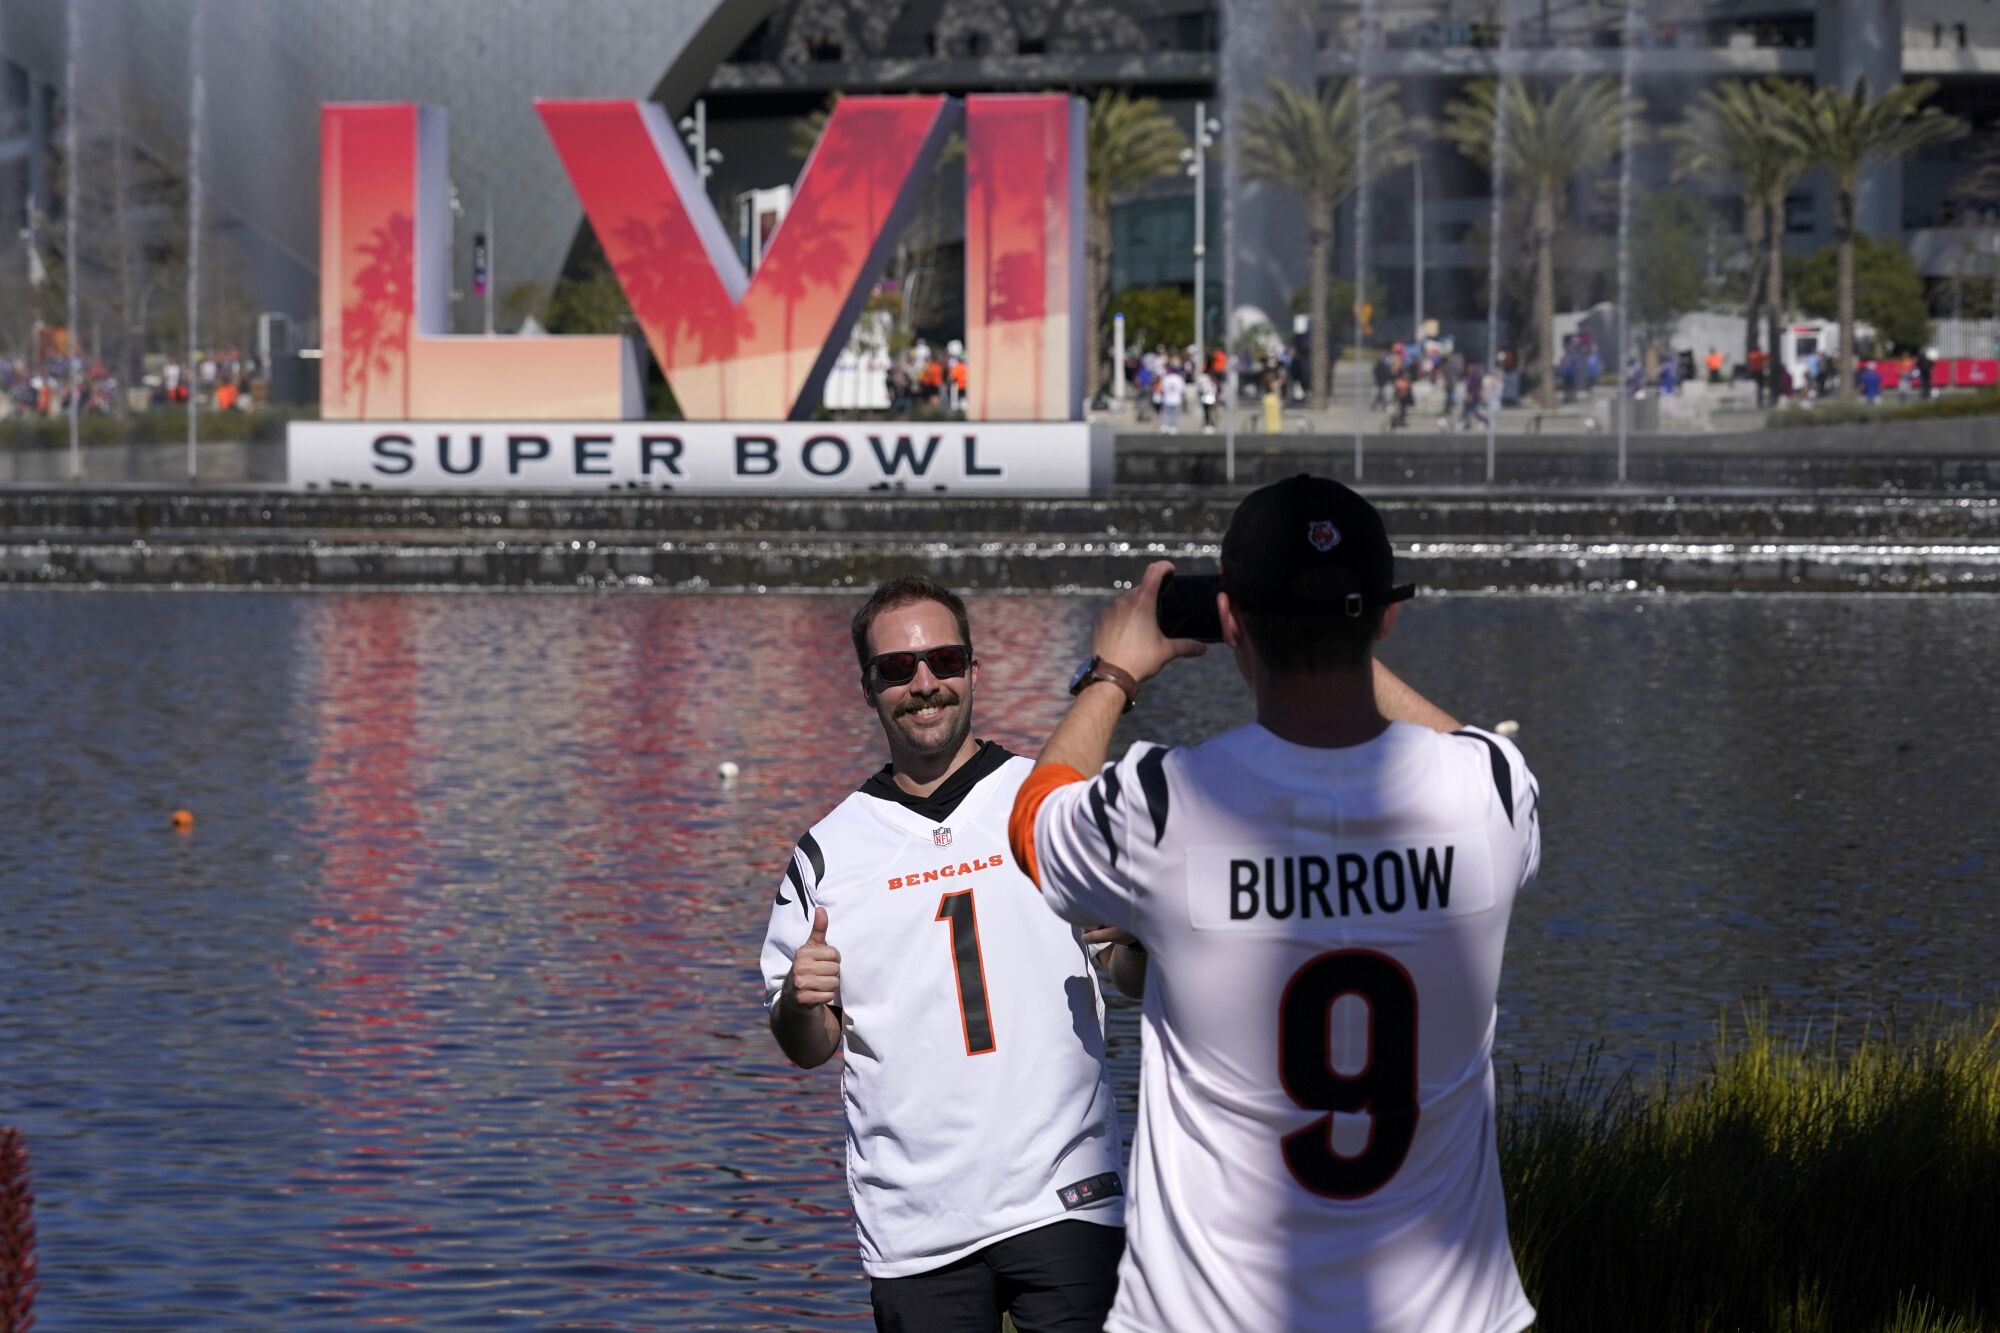 Cincinnati Bengals fans take pictures in front of big Super Bowl LVI letters and a body of water 